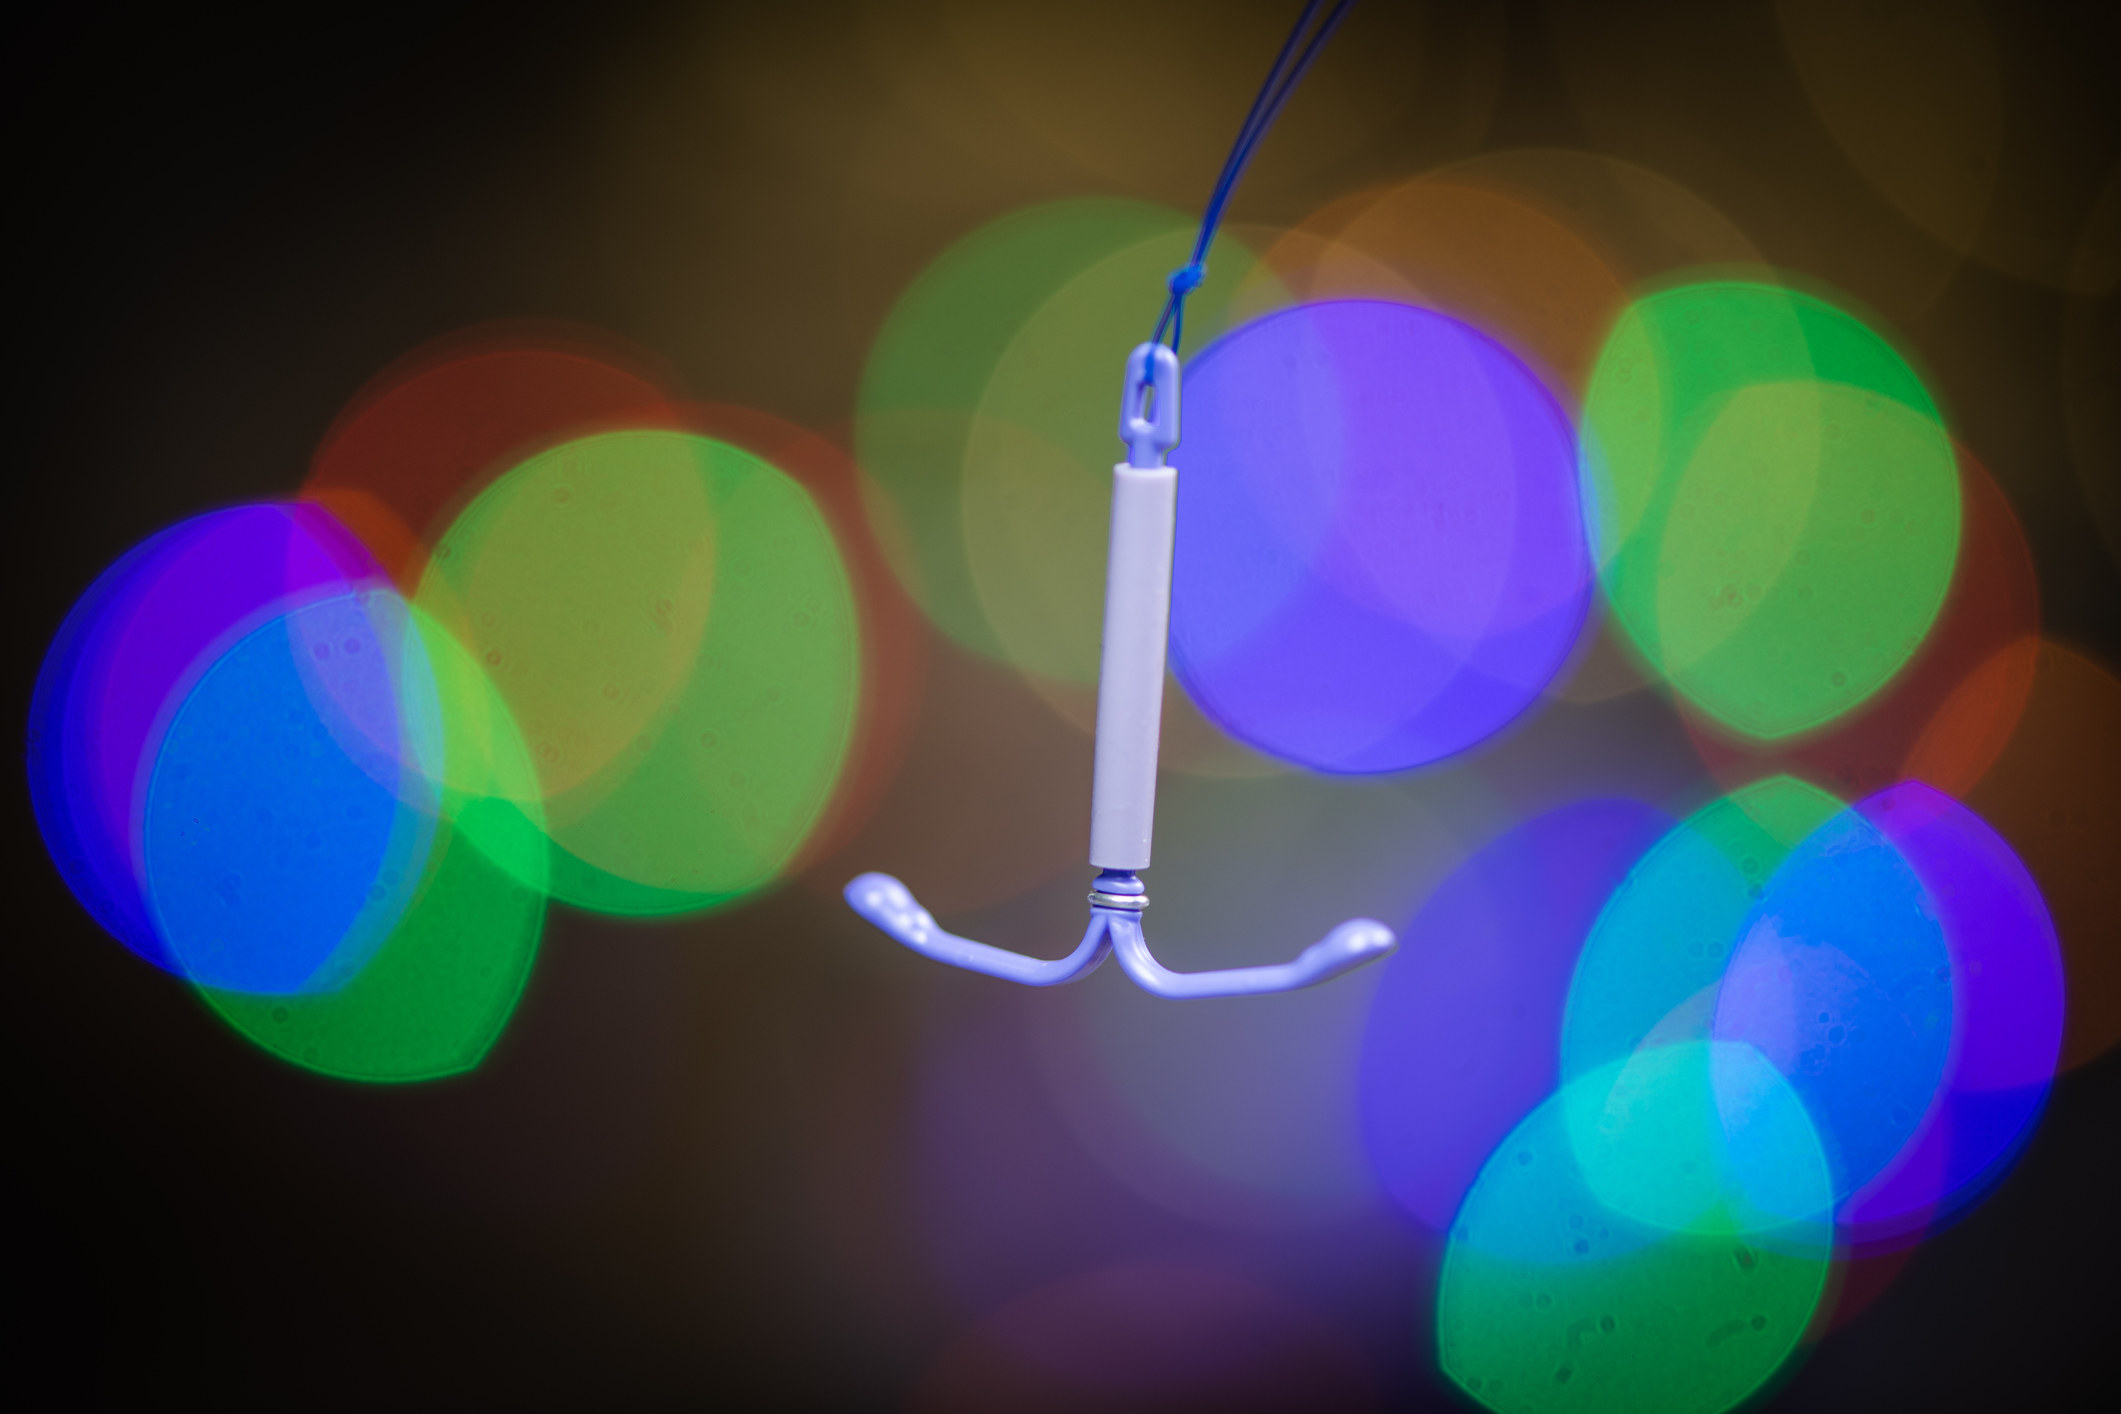 A stock image of an IUD